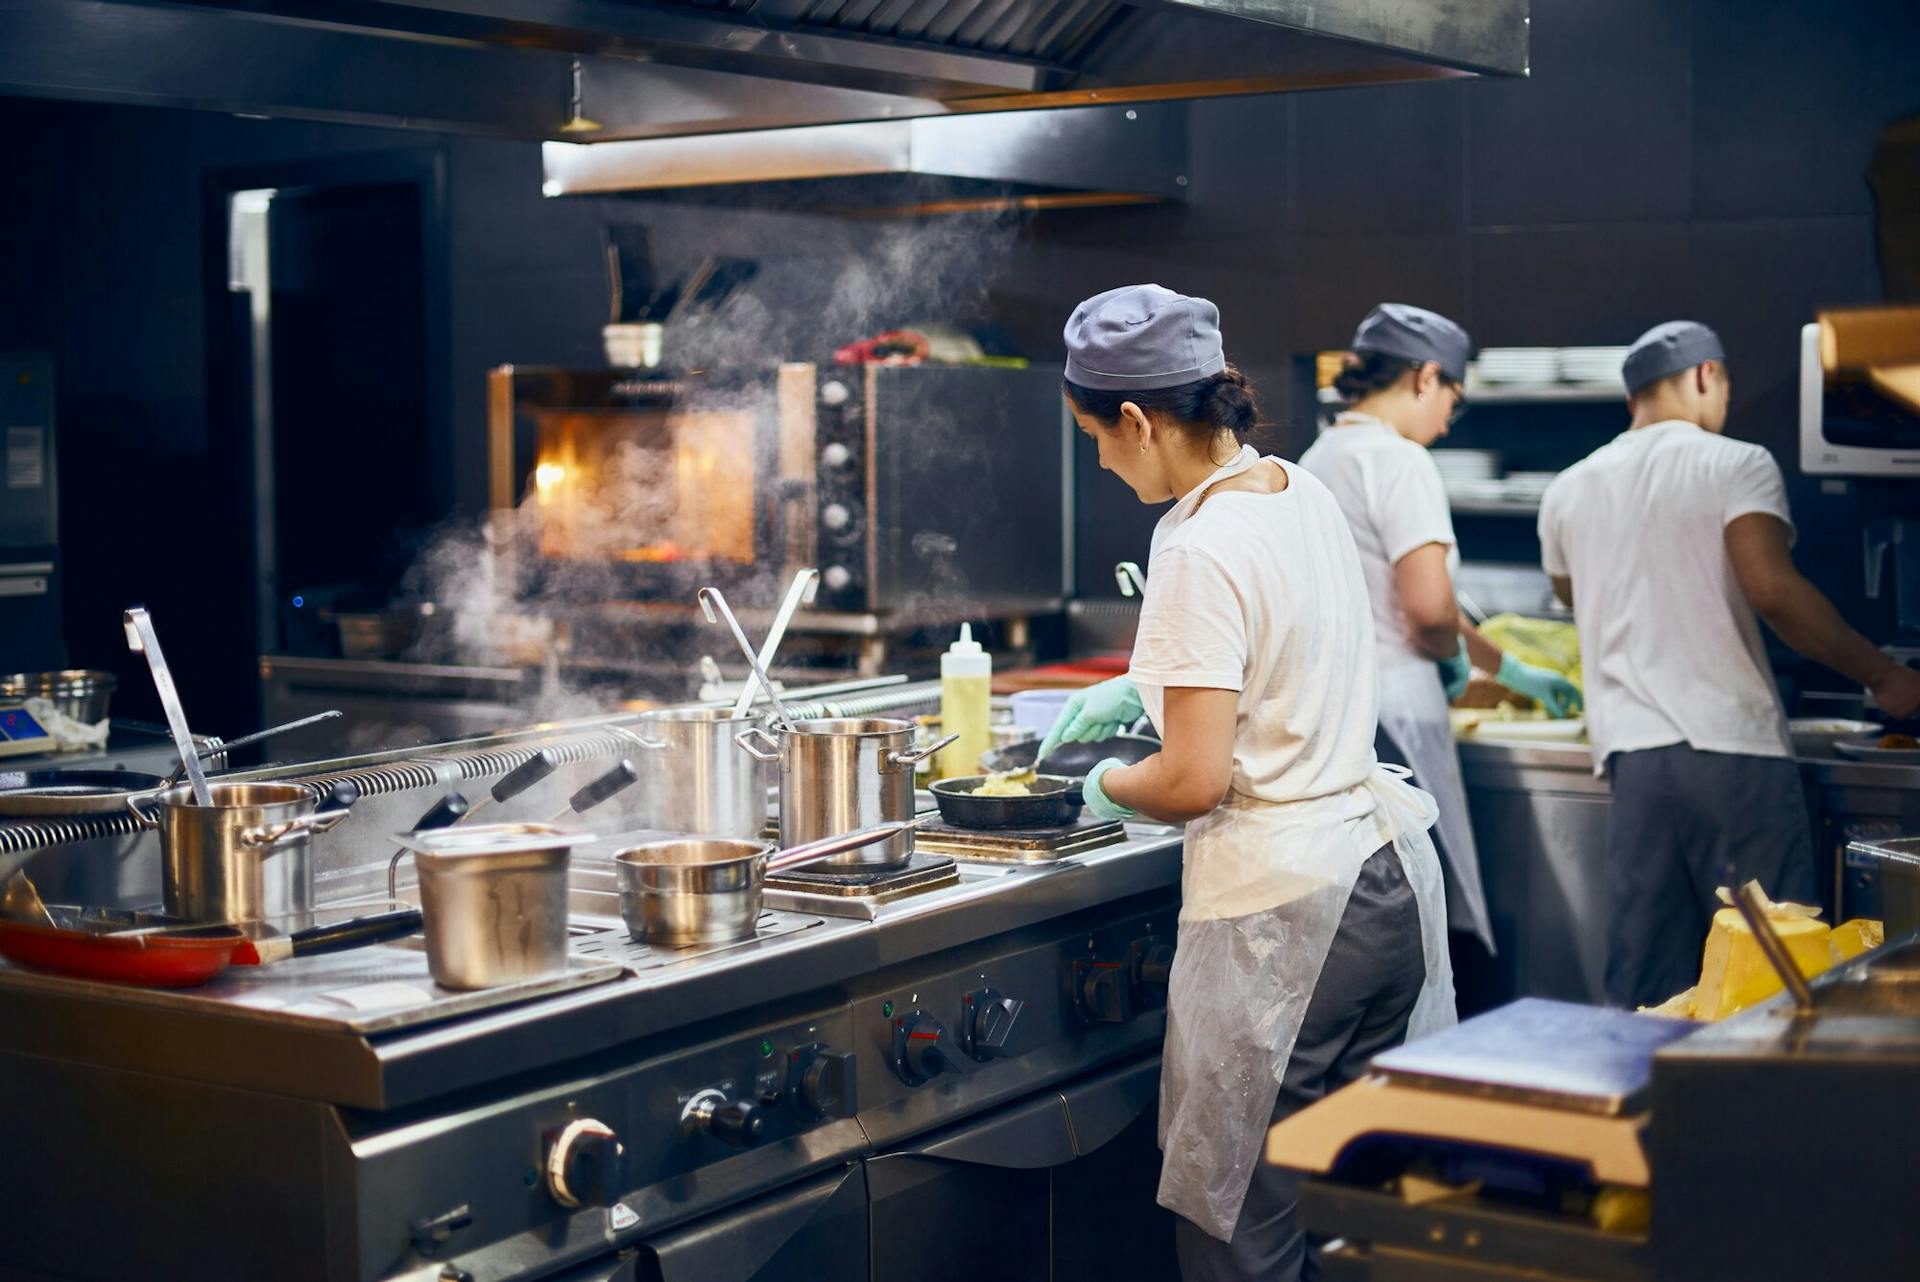 How Restaurants Can Minimize the Impact of COVID-19